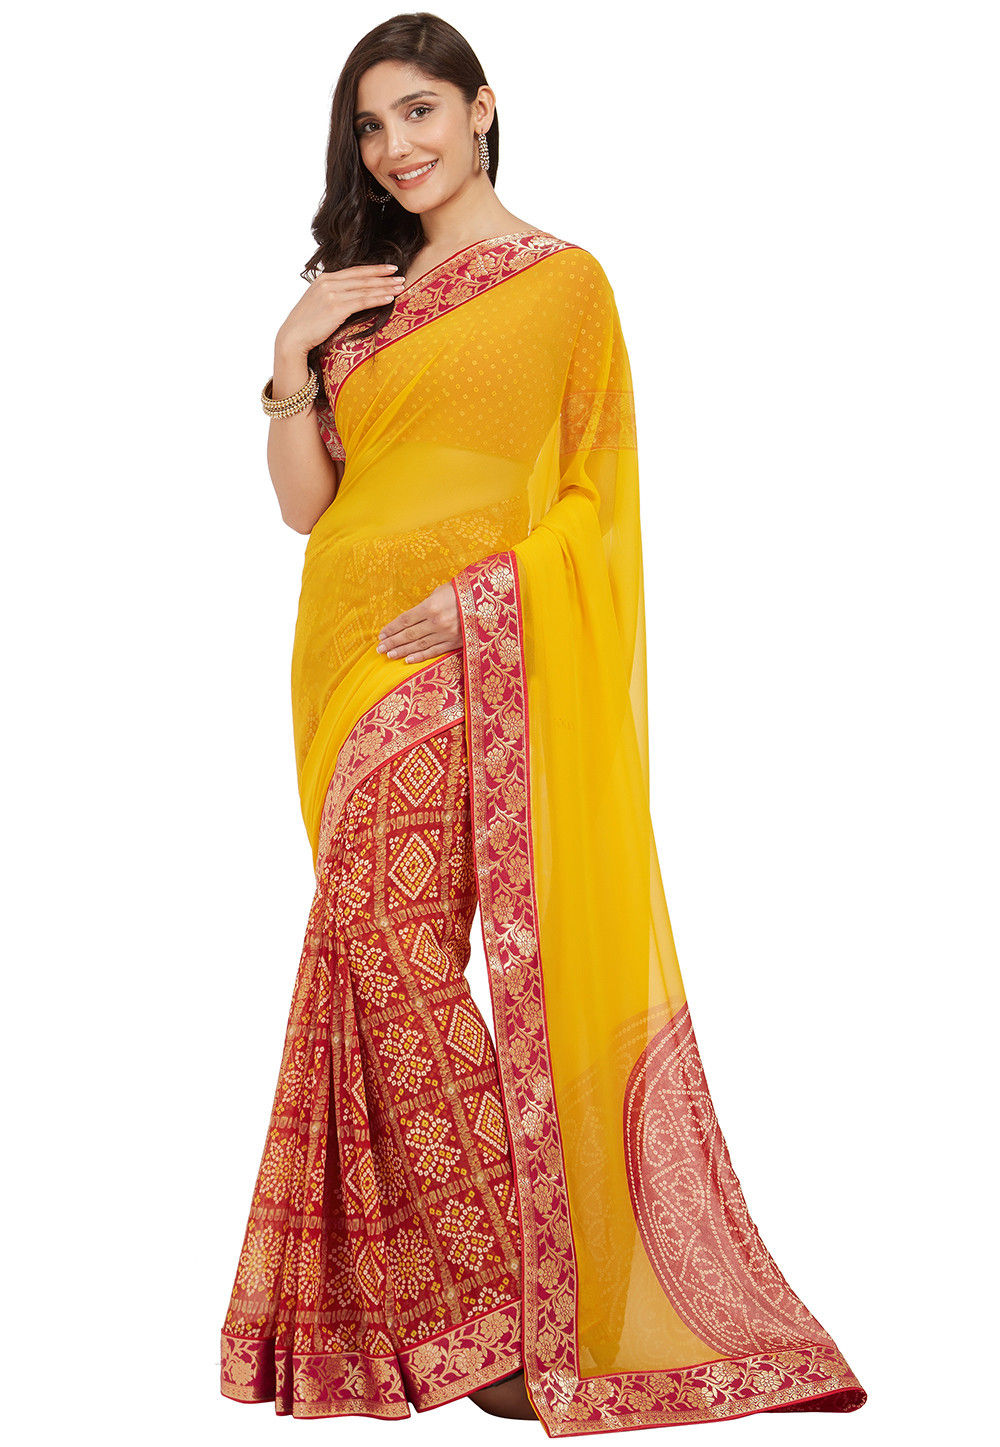 Bandhej Printed Georgette Saree in Yellow and Red : SJRA667